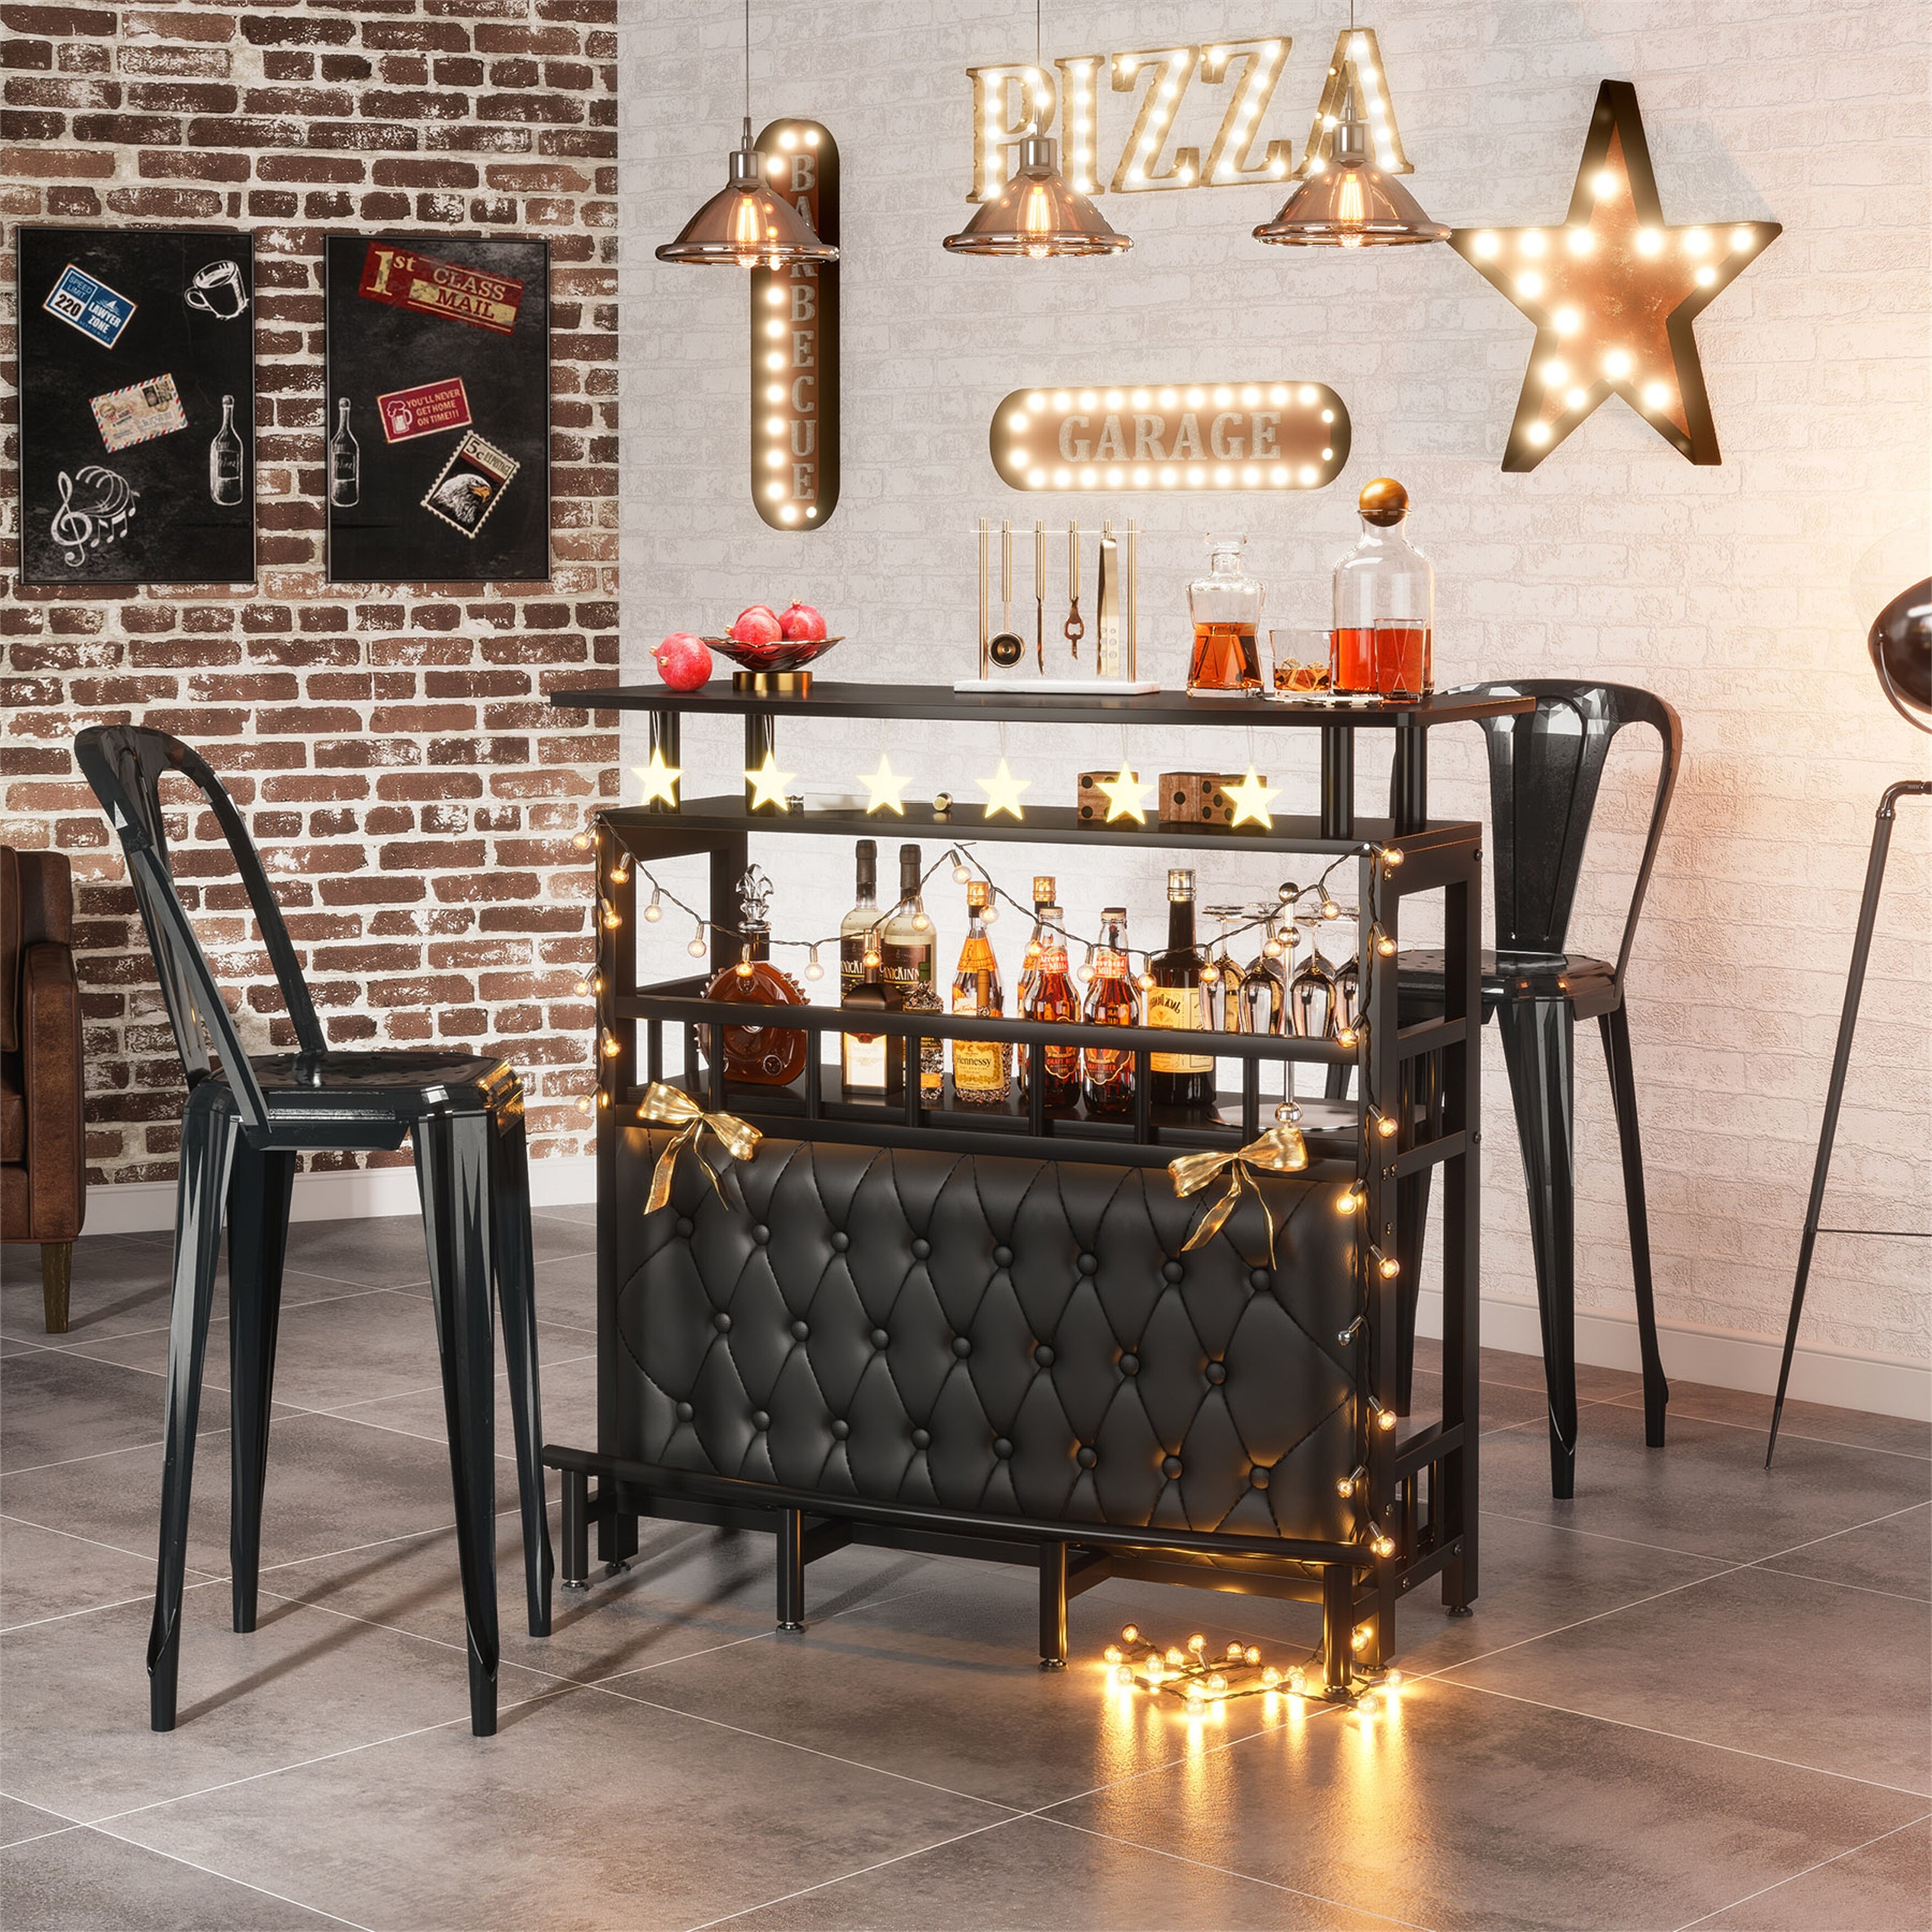 https://ak1.ostkcdn.com/images/products/is/images/direct/b189f8ac04feb4af915533e27e51020c16327cf7/Home-Bar-Unit%2C4-Tier-Liquor-Bar-Table-with-Storage-and-Footrest%2CBar-Organizer-Table-for-Home-Bar.jpg